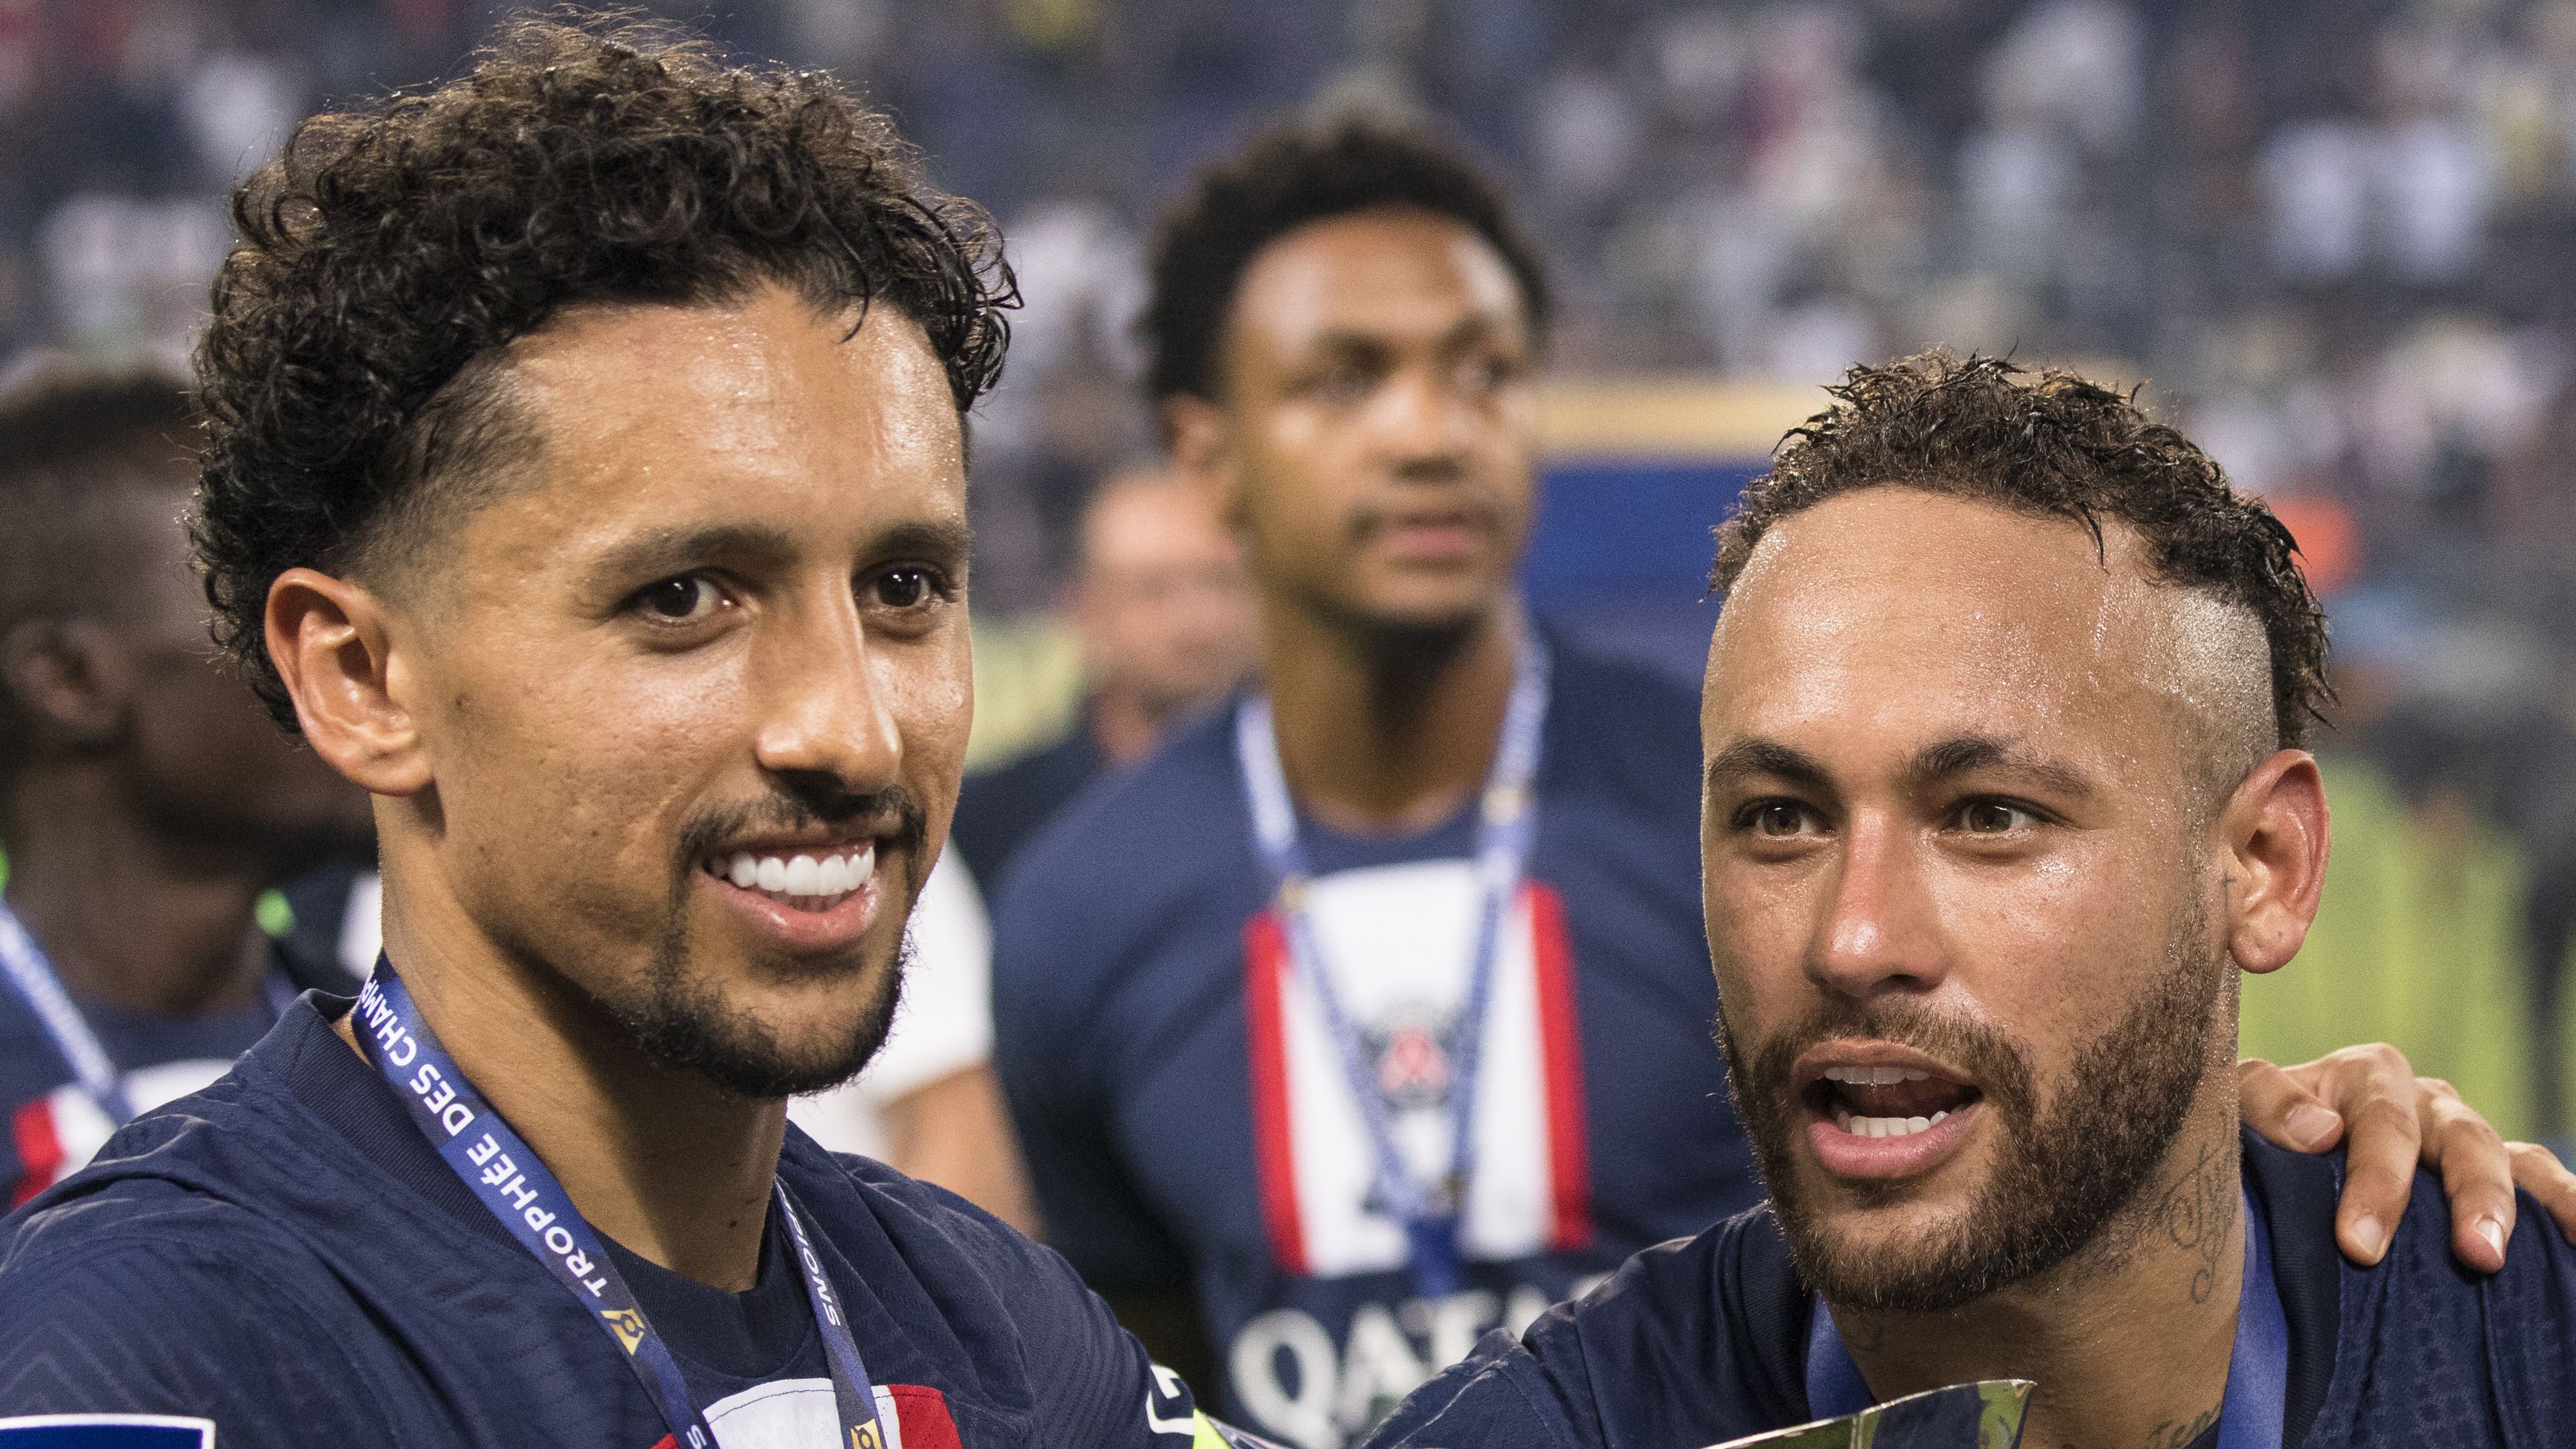 Neymar and Marquinhos after winning the French Super Cup, for PSG (Credit: Getty Images)